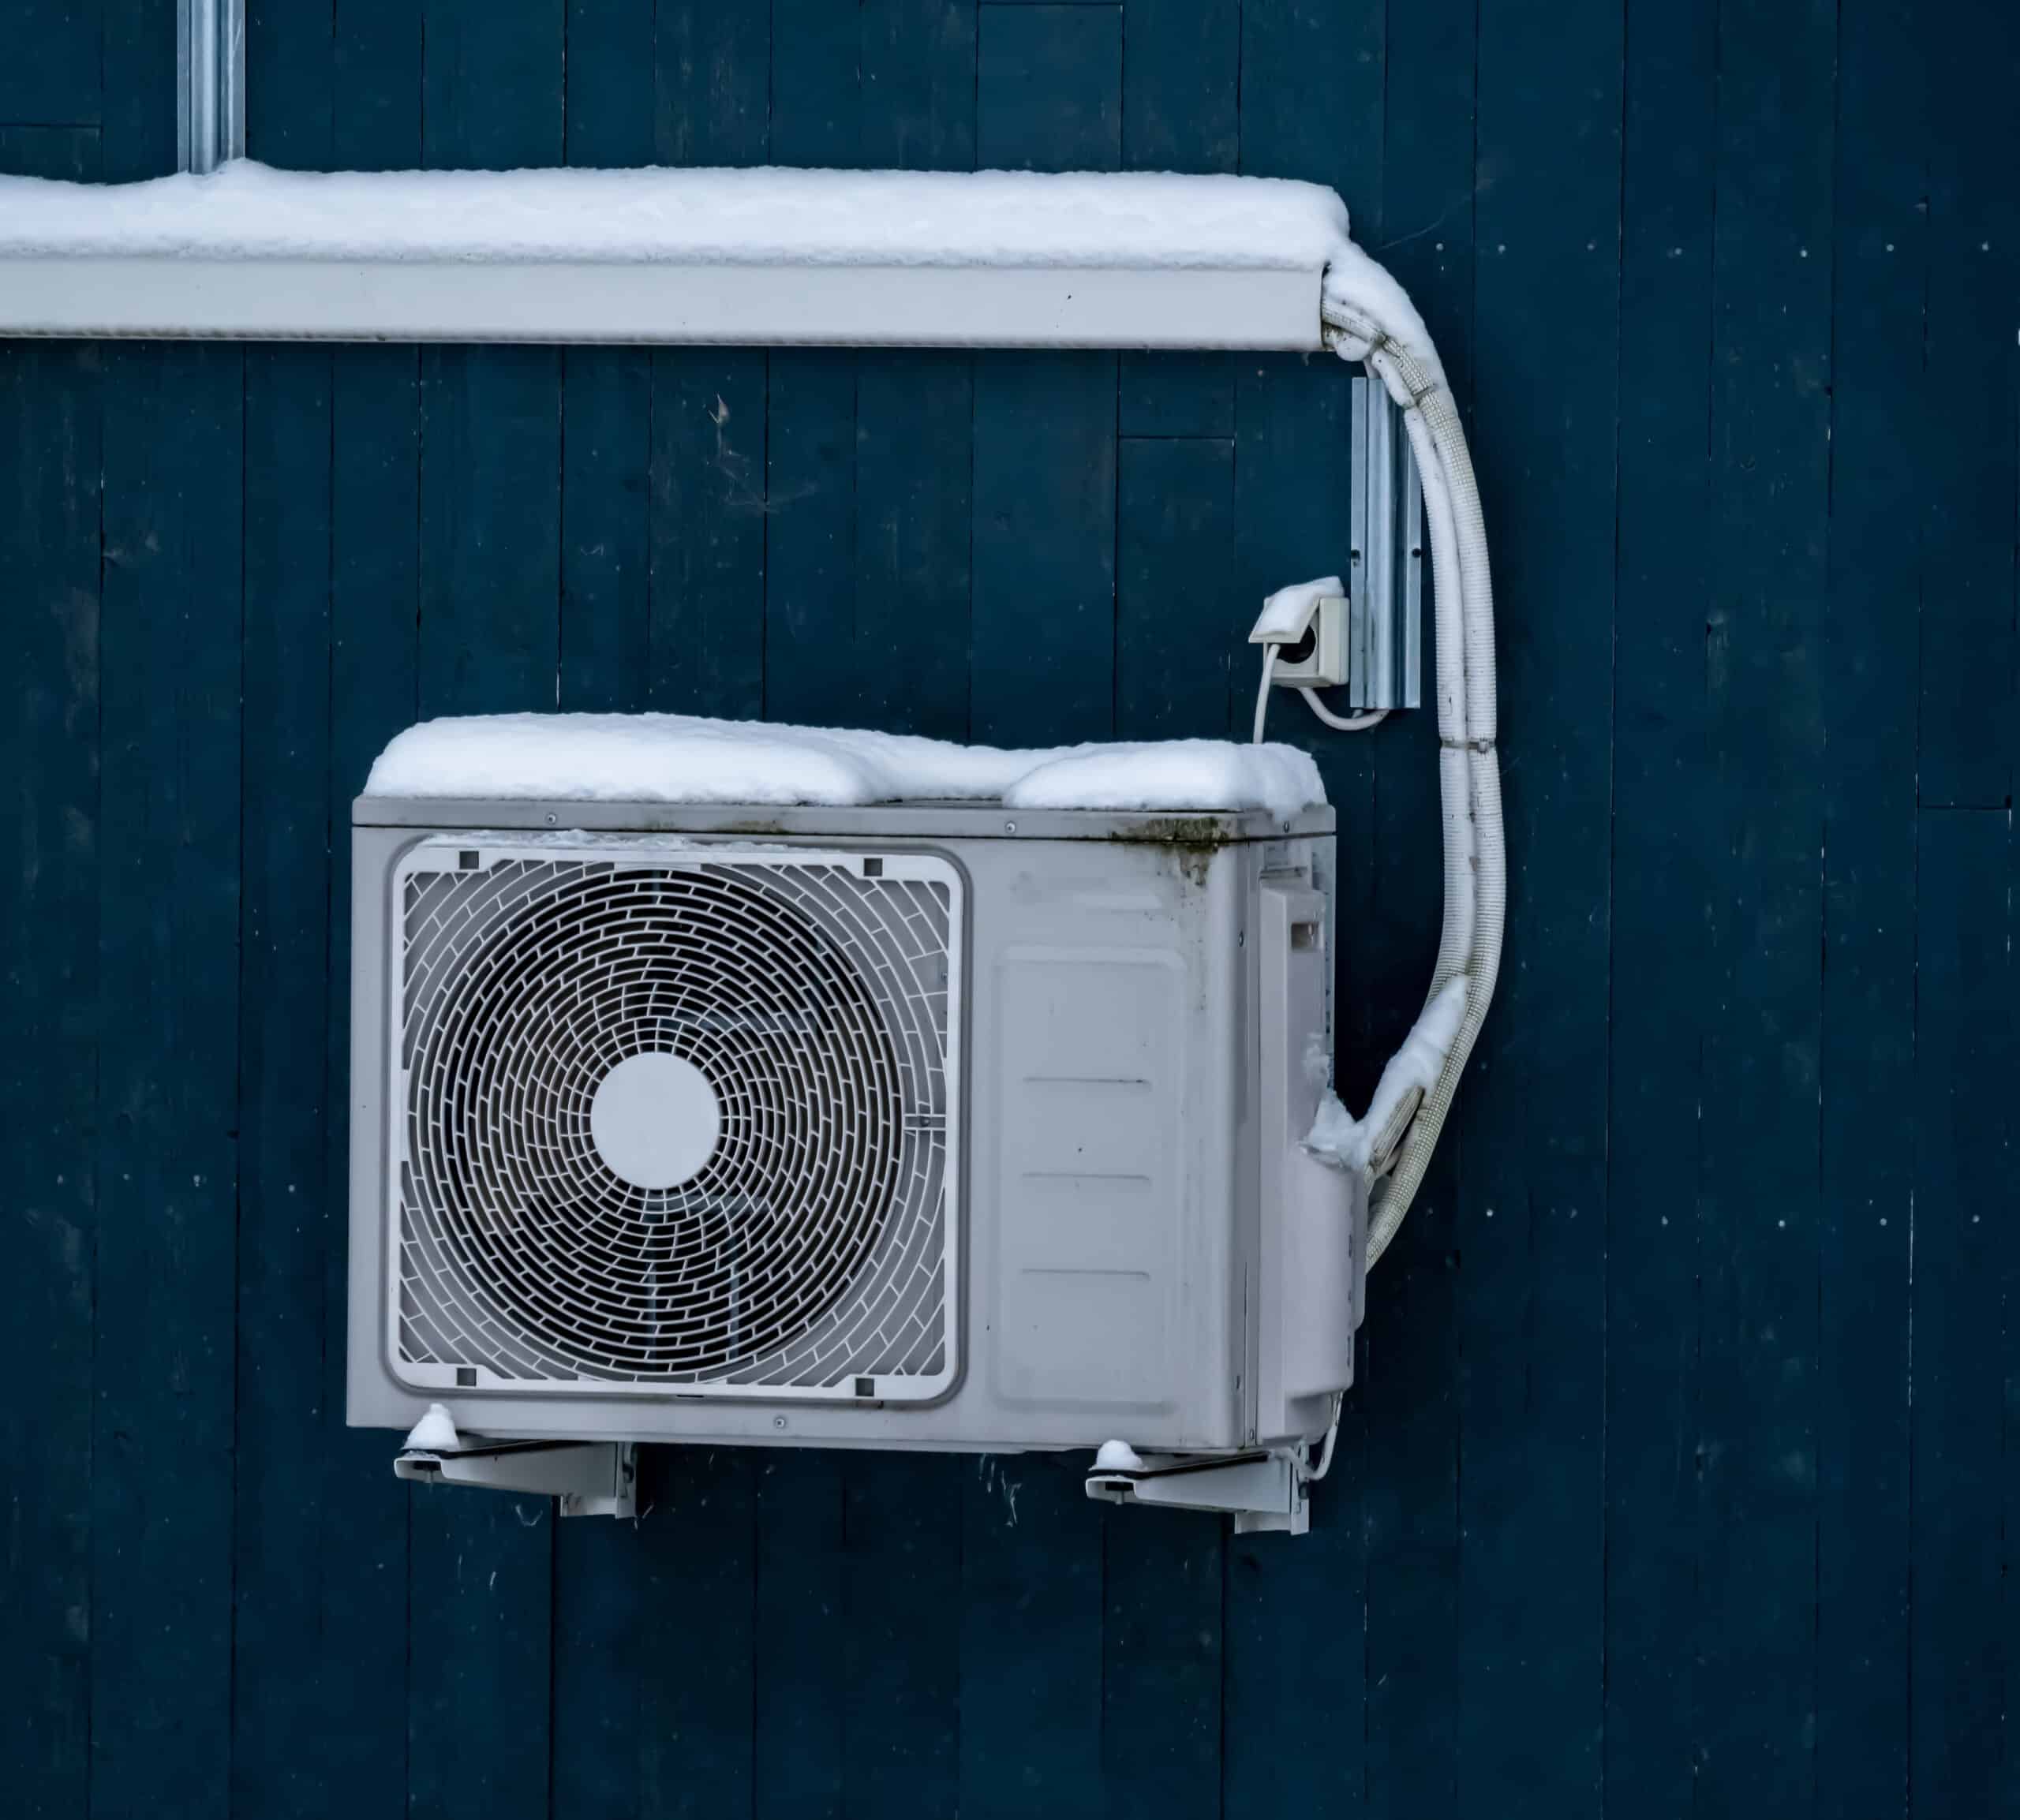 Snow-covered heat pump mounted on an outside wall